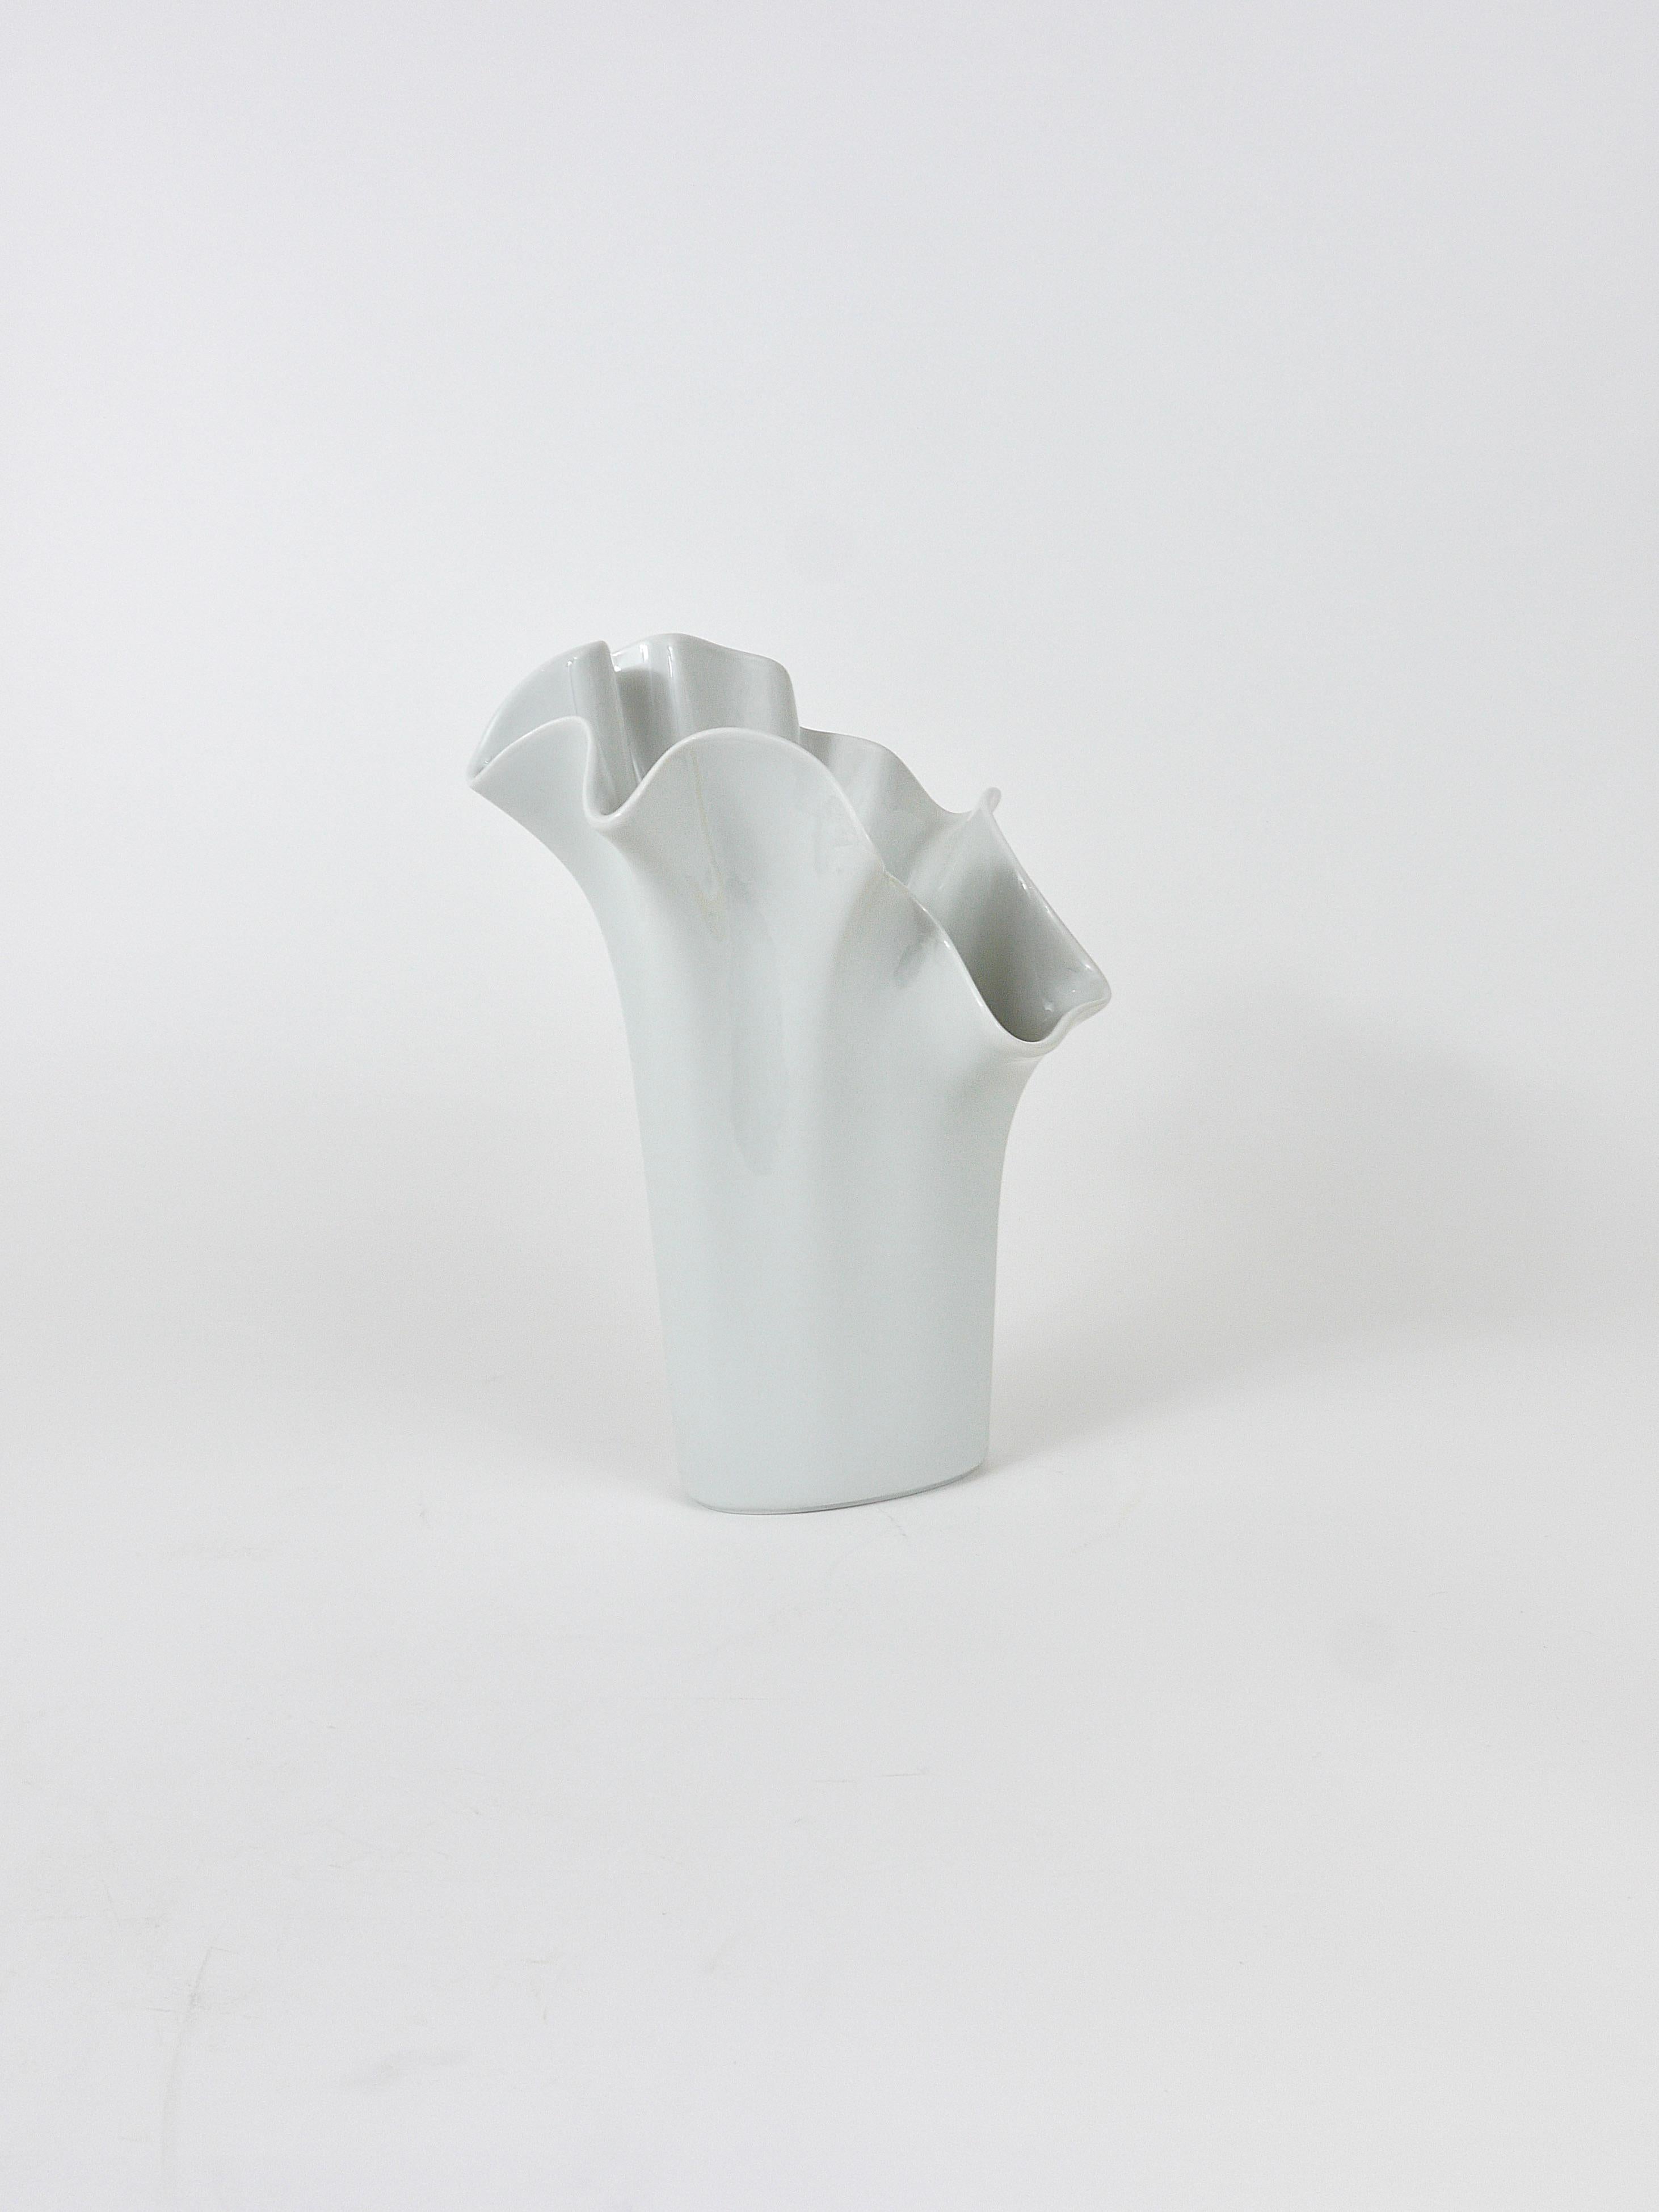 Rosenthal Studio-line Fazzoletto Asym Vase by Claus Josef Riedel, Germany, 1970s 10